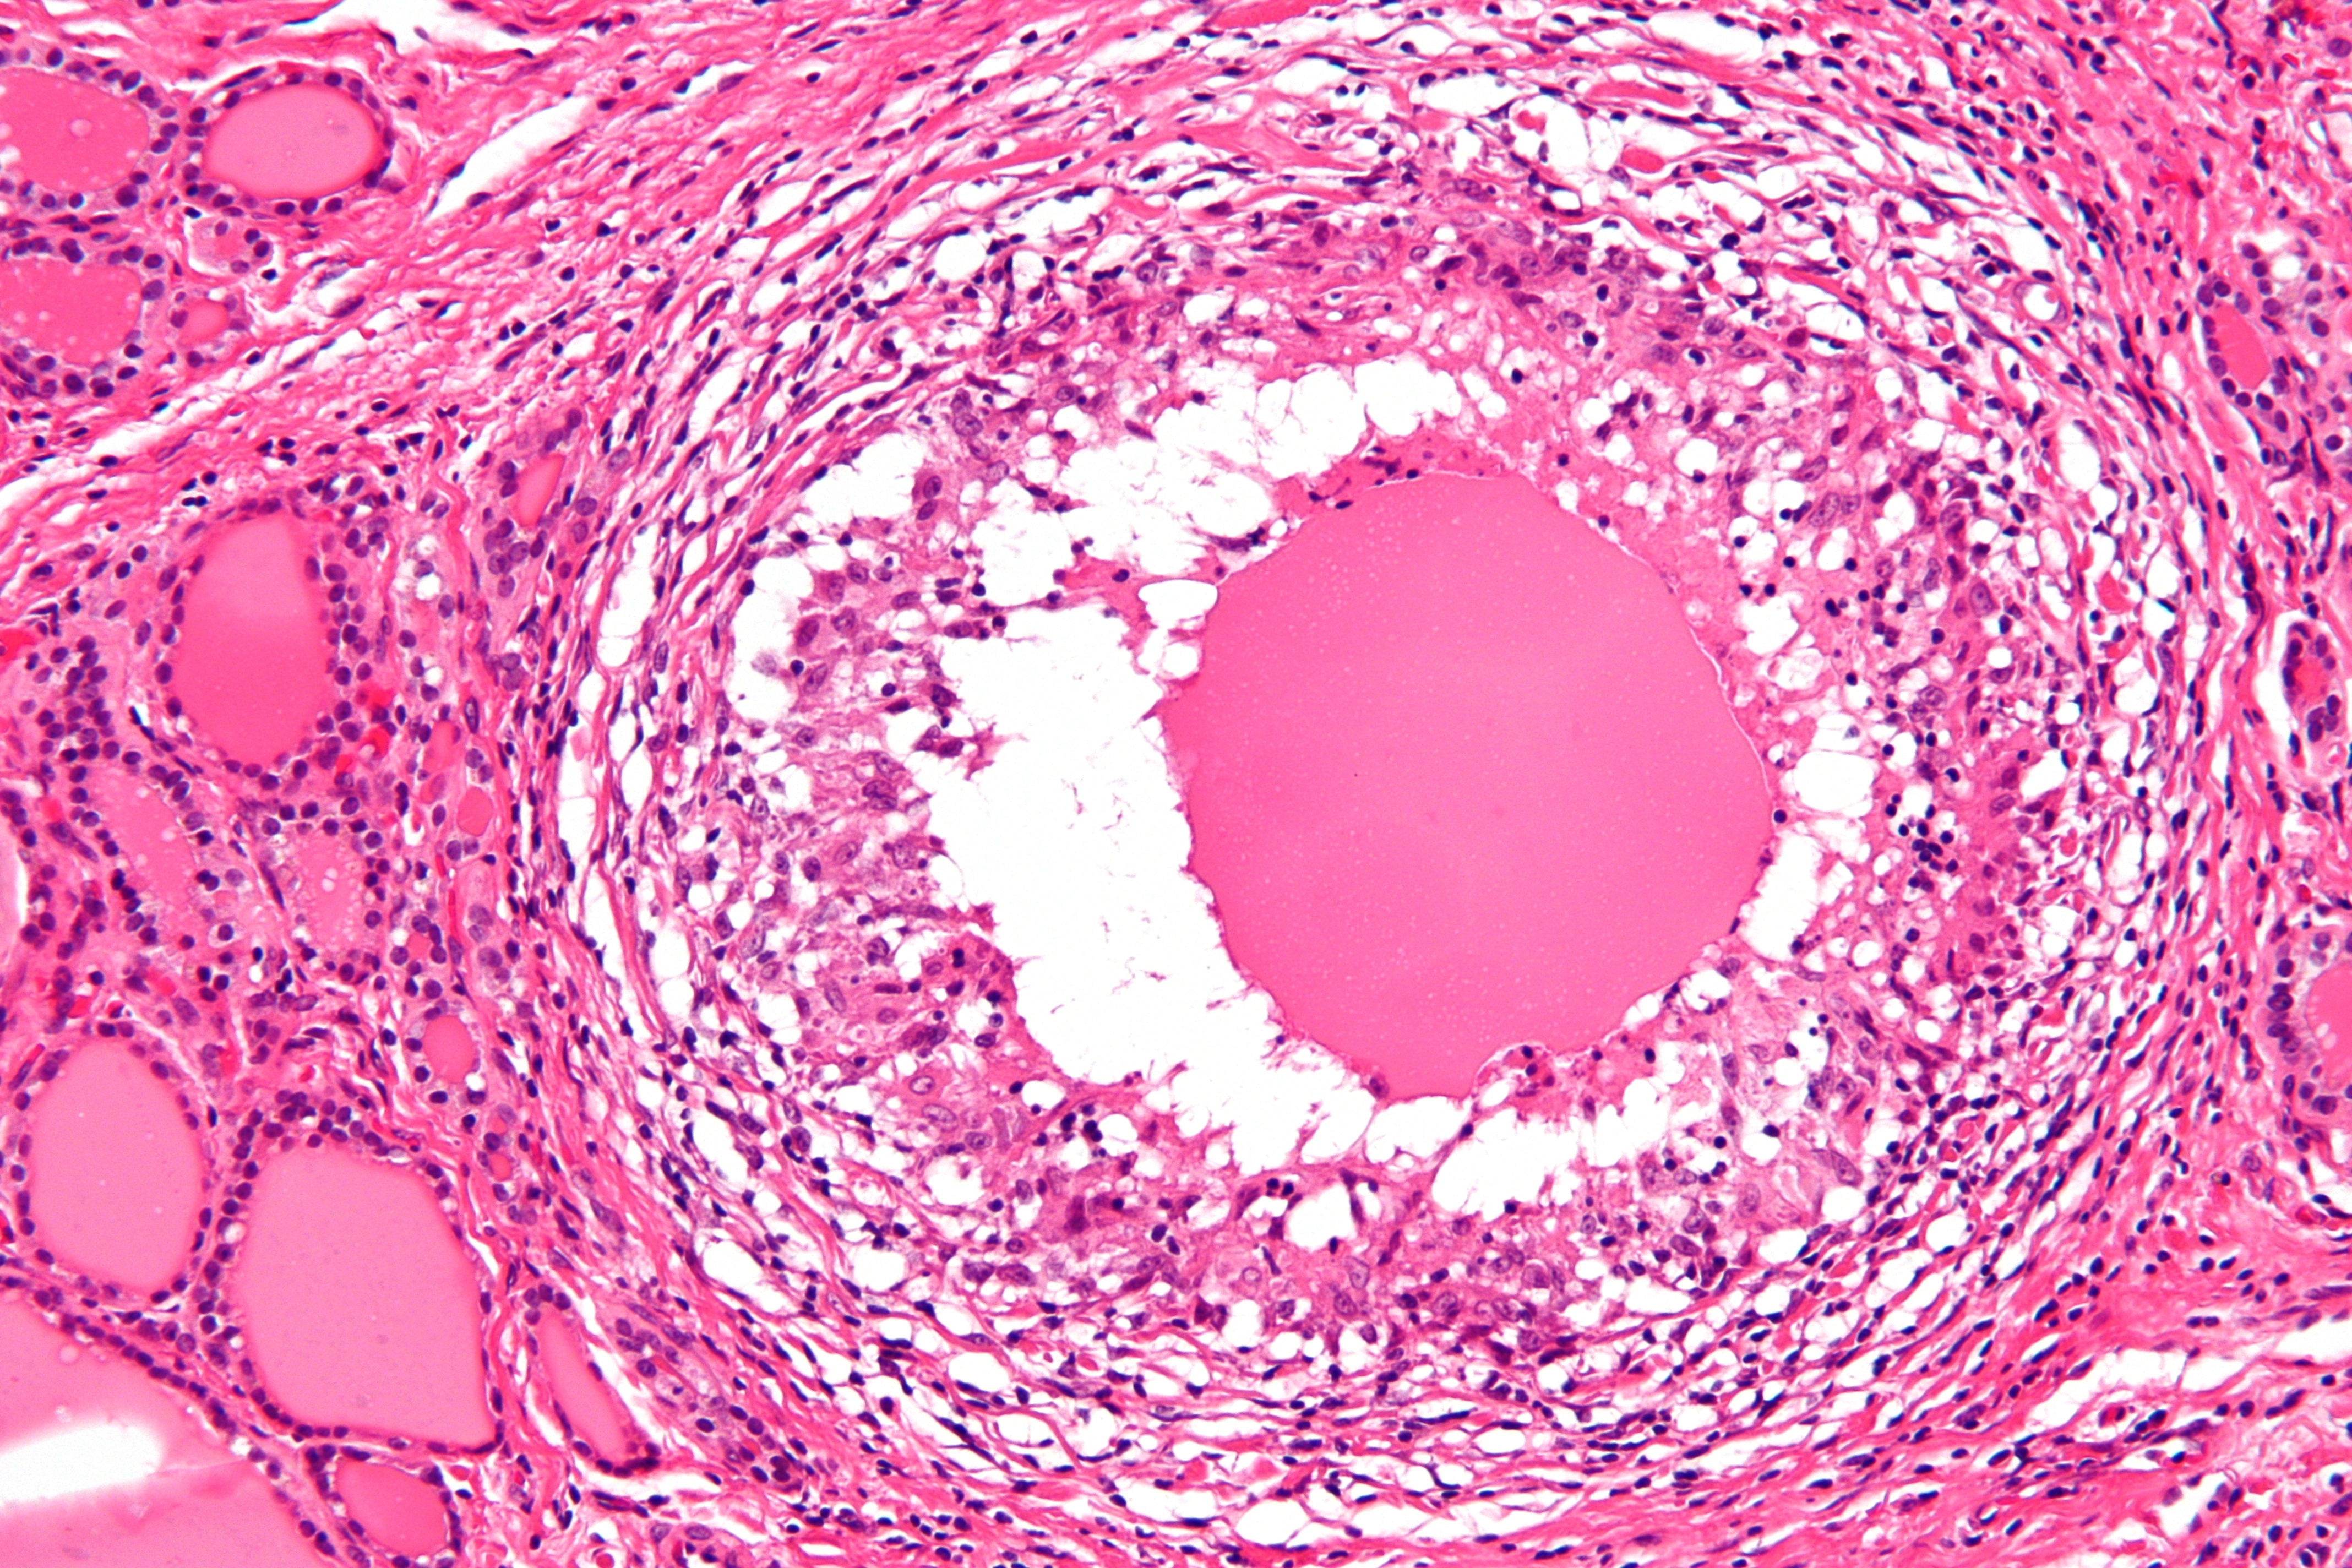 Histology of De Quervain's thyroiditis; Granuloma (By Nephron - Own work, CC BY-SA 3.0, https://commons.wikimedia.org/w/index.php?curid=18491421)